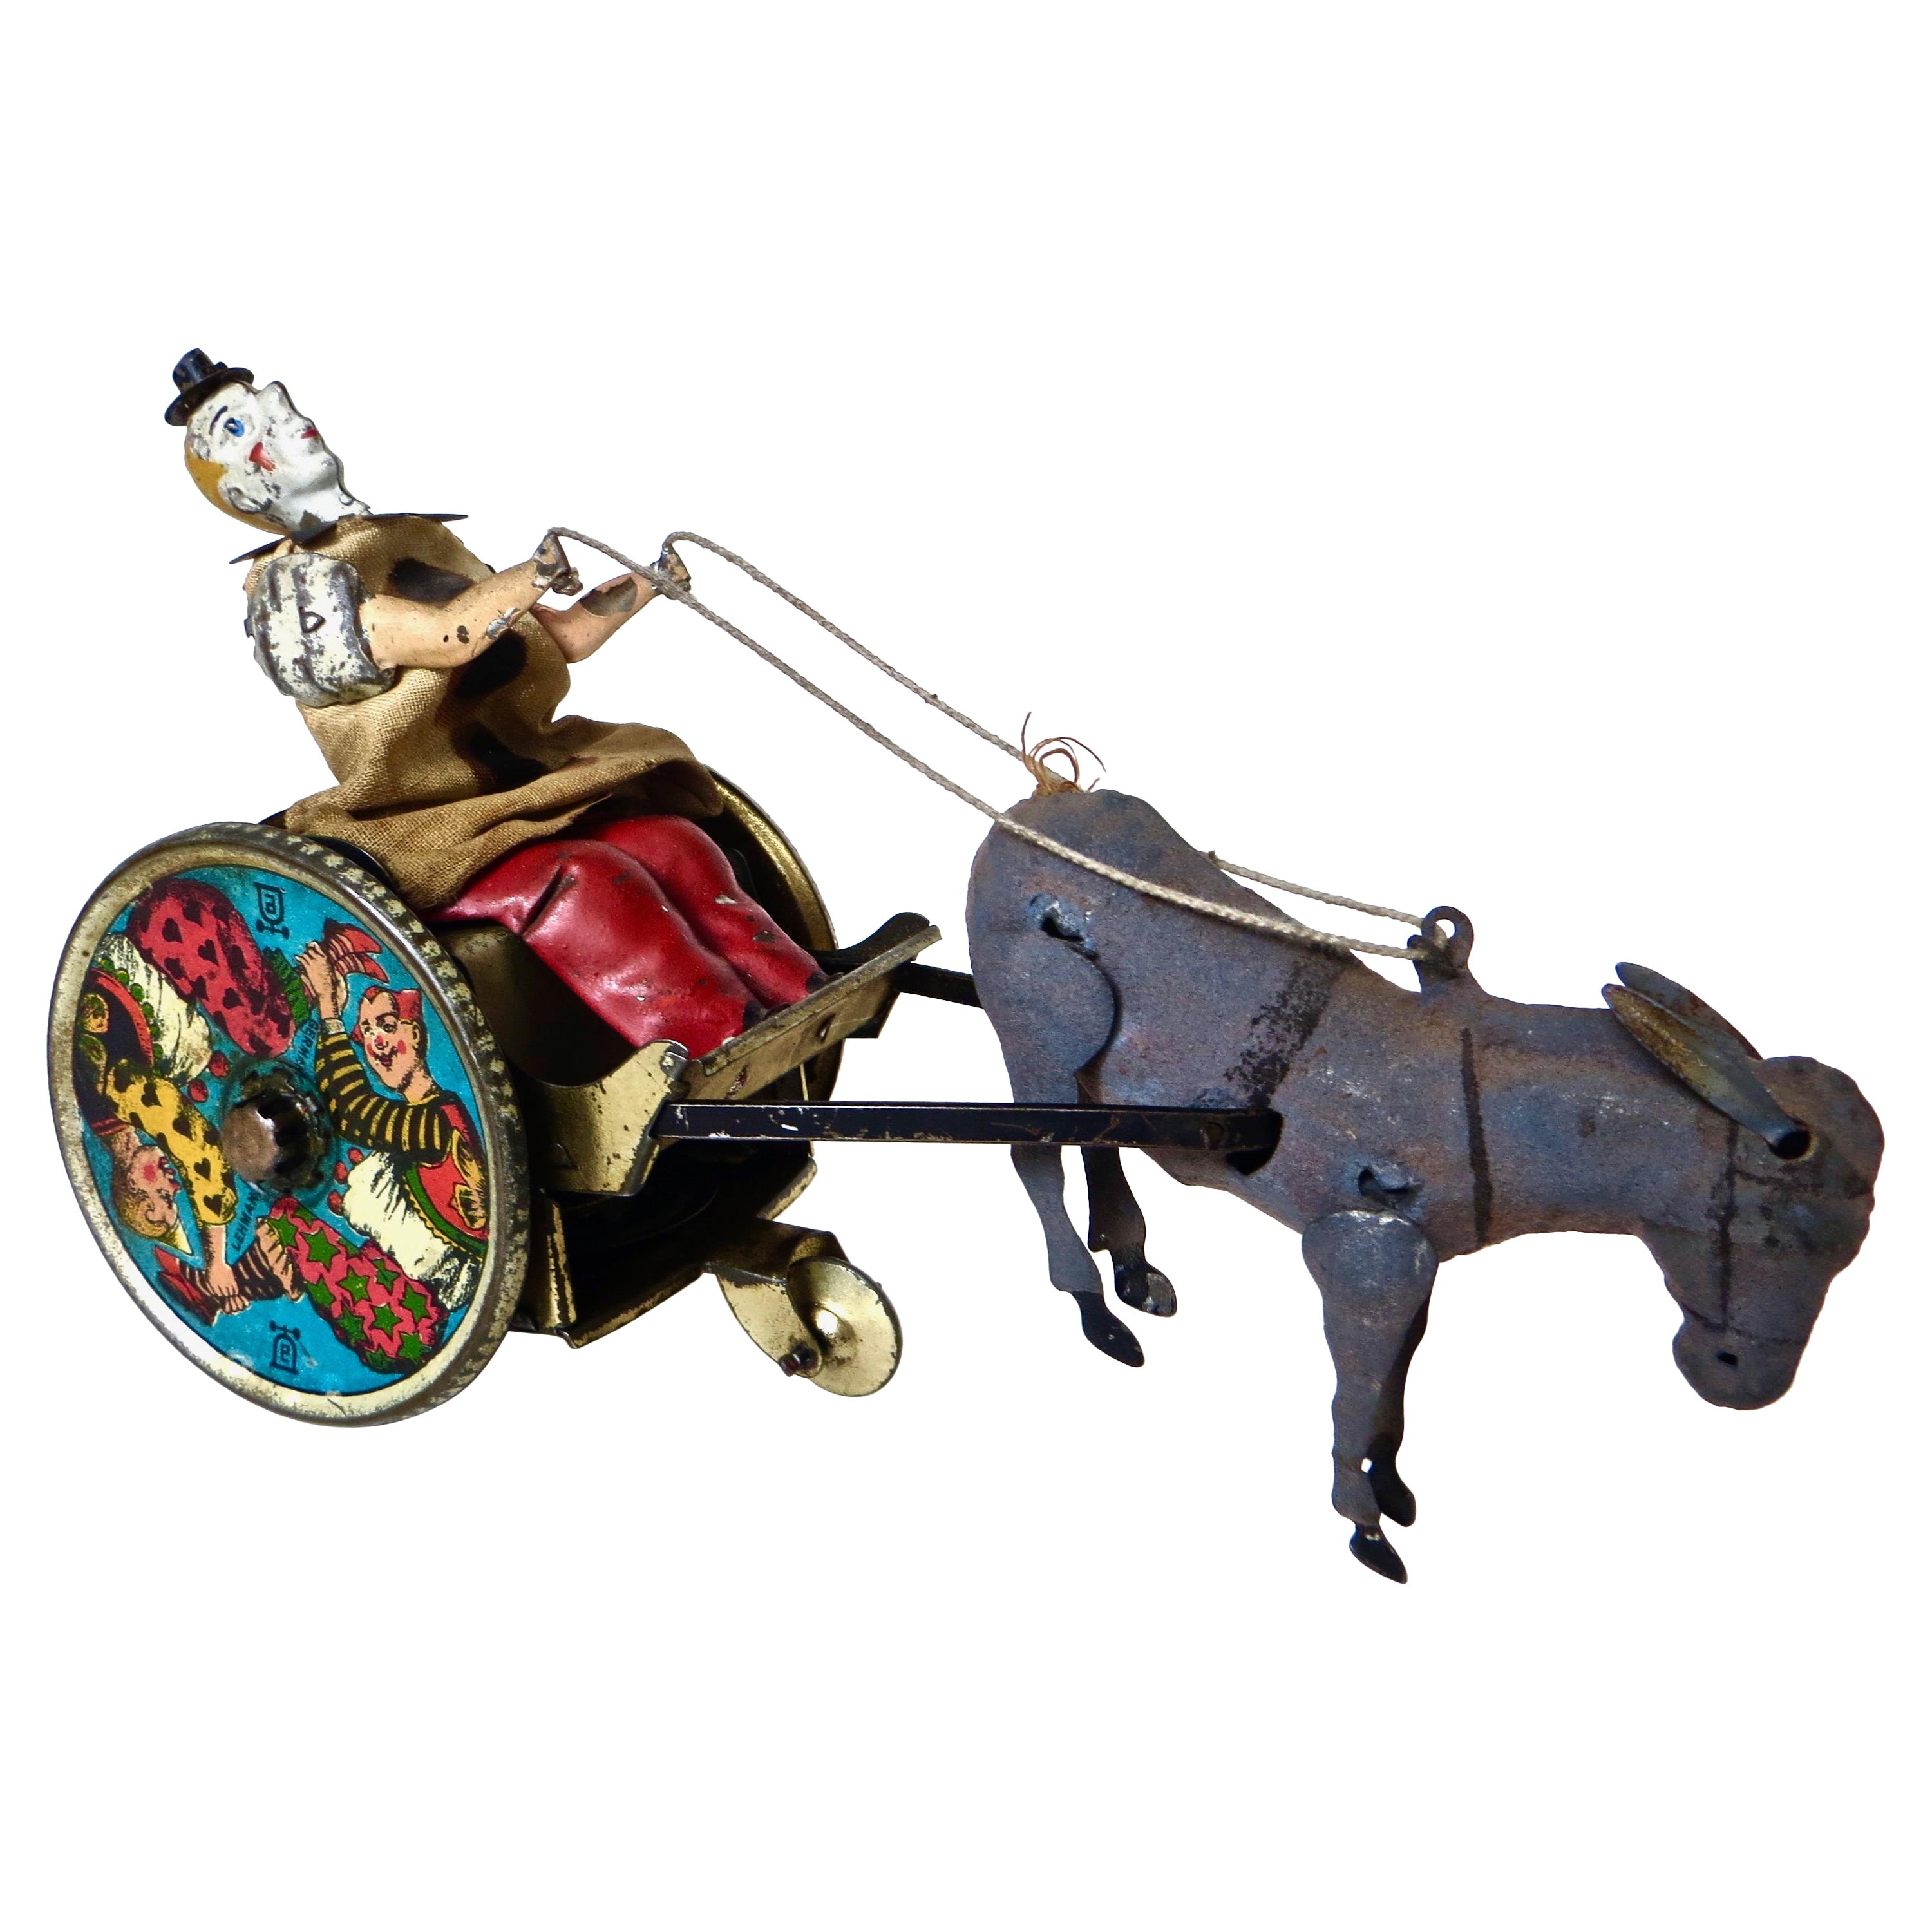 German Tinplate Clockwork Wind Up Toy by the Lehman Co. "Balky Mule" Circa 1909